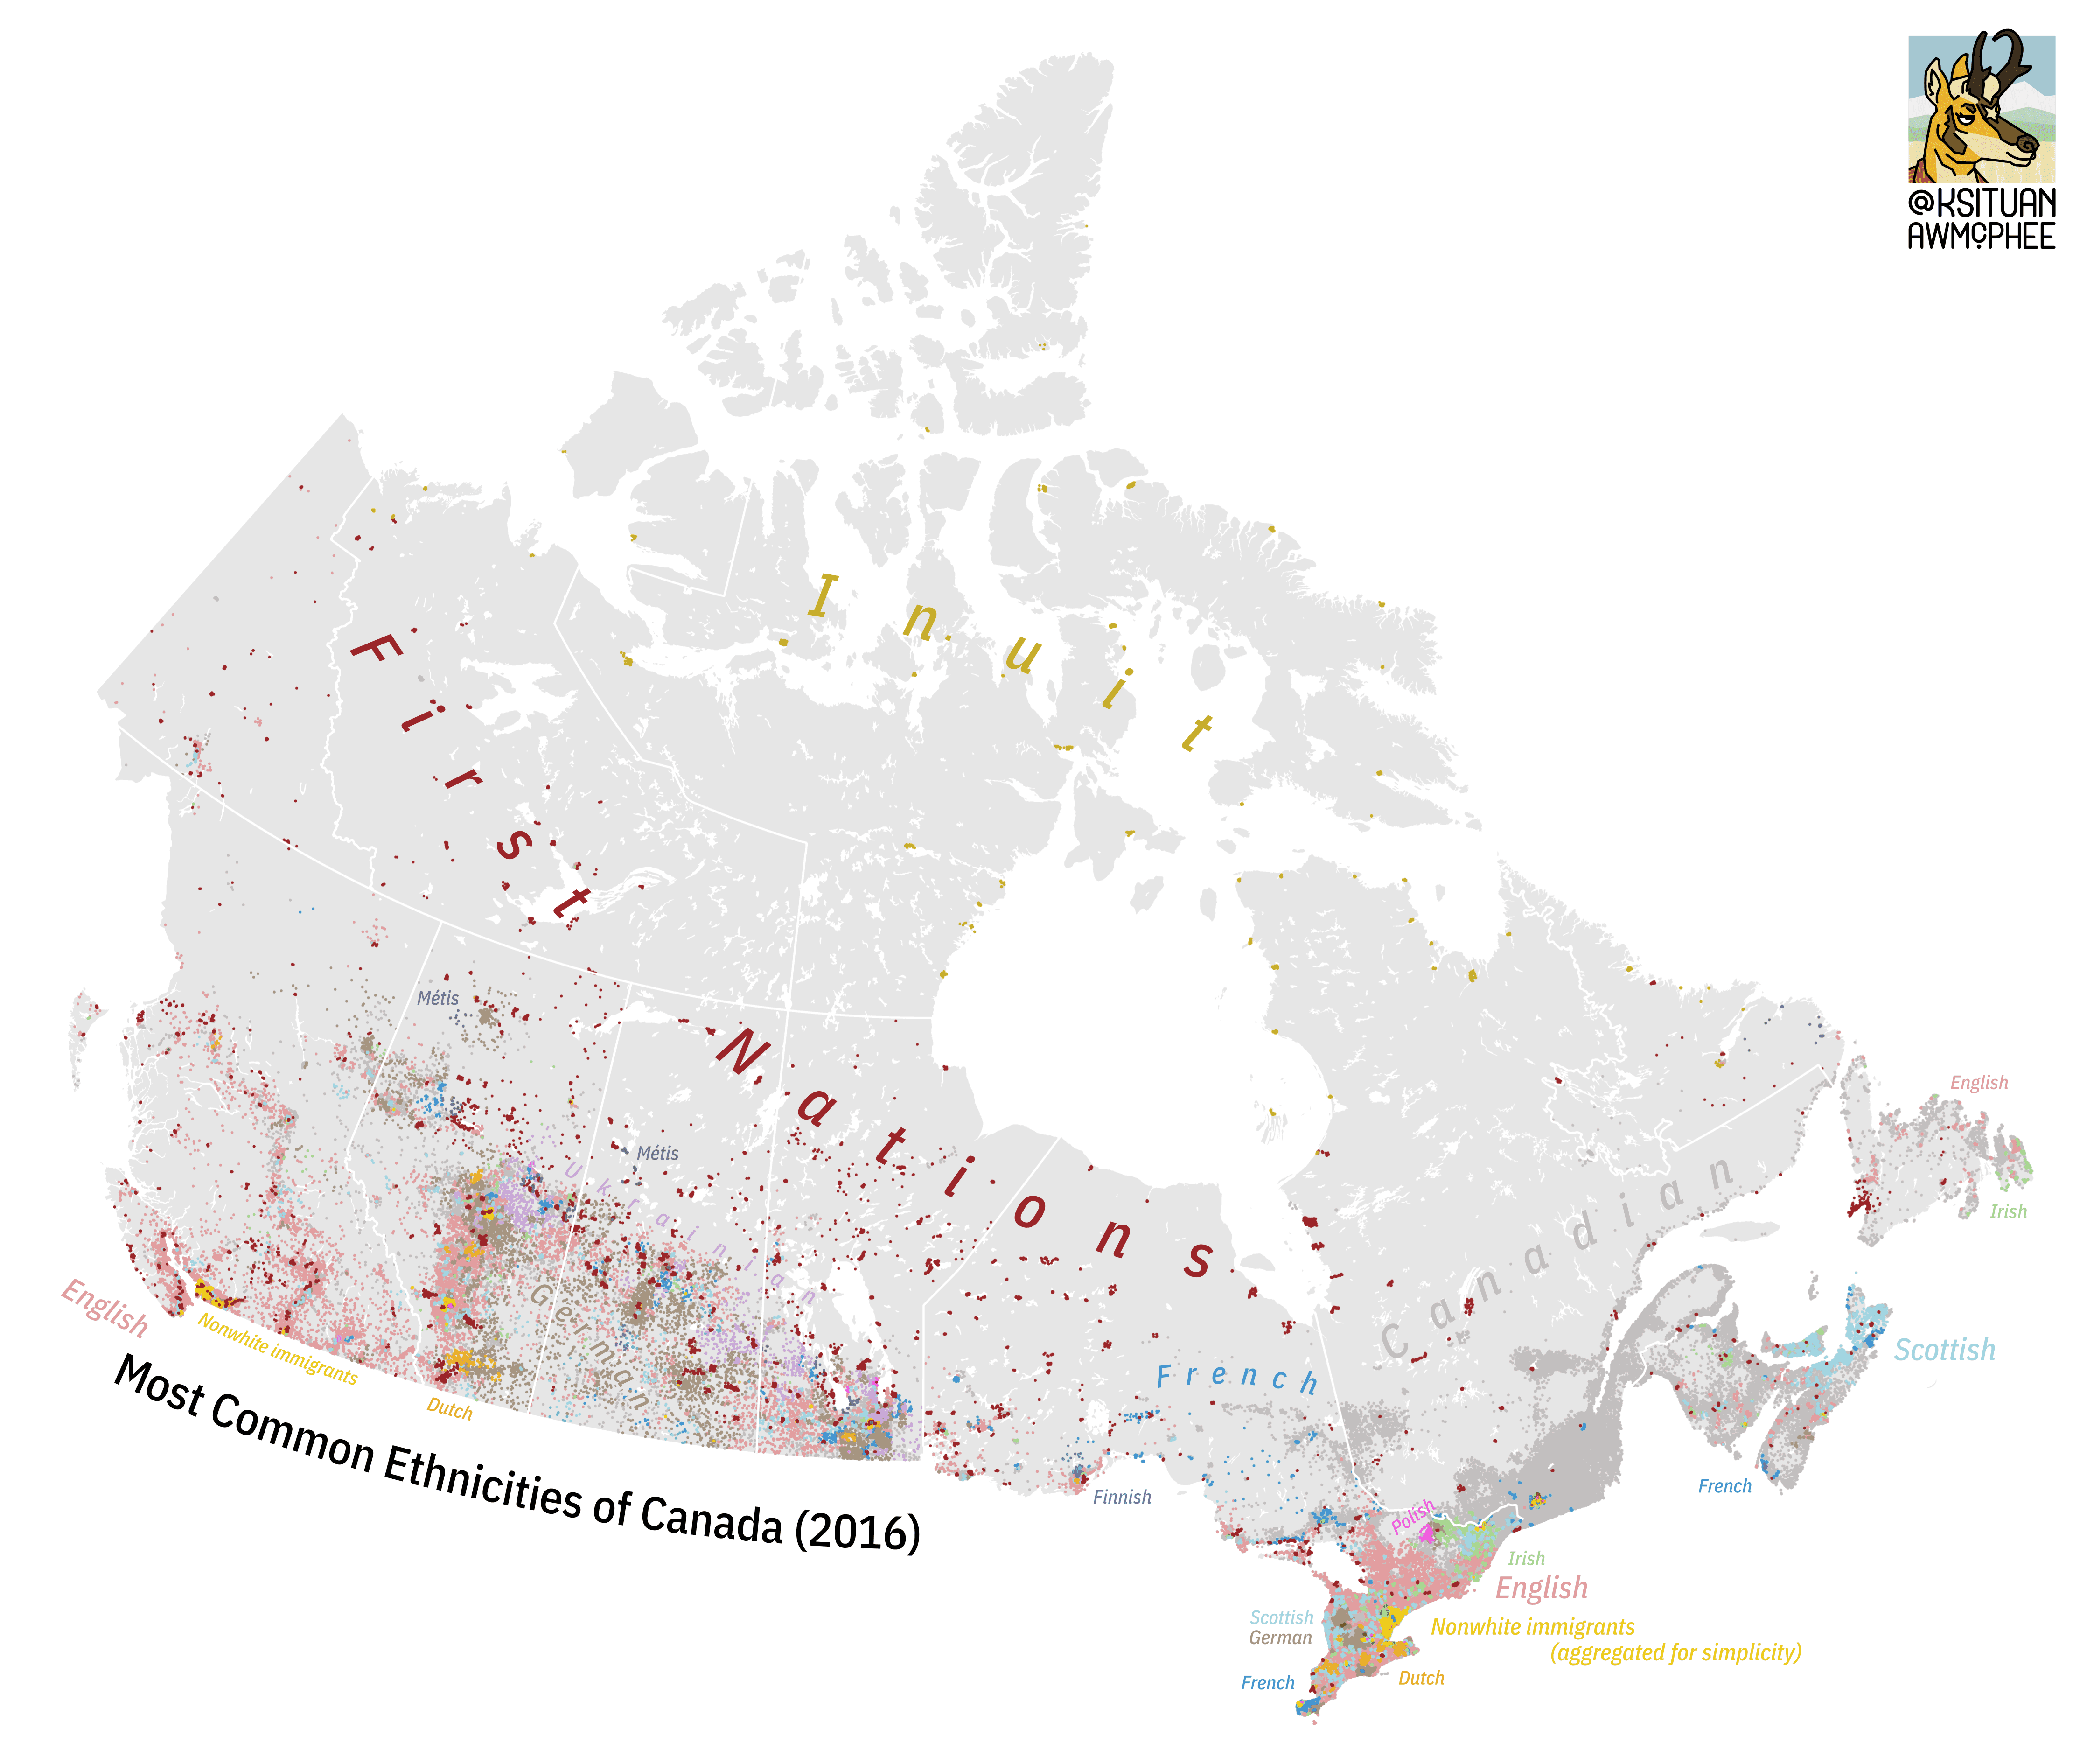 A dot density map of the most common ethnicities reported in Canada.